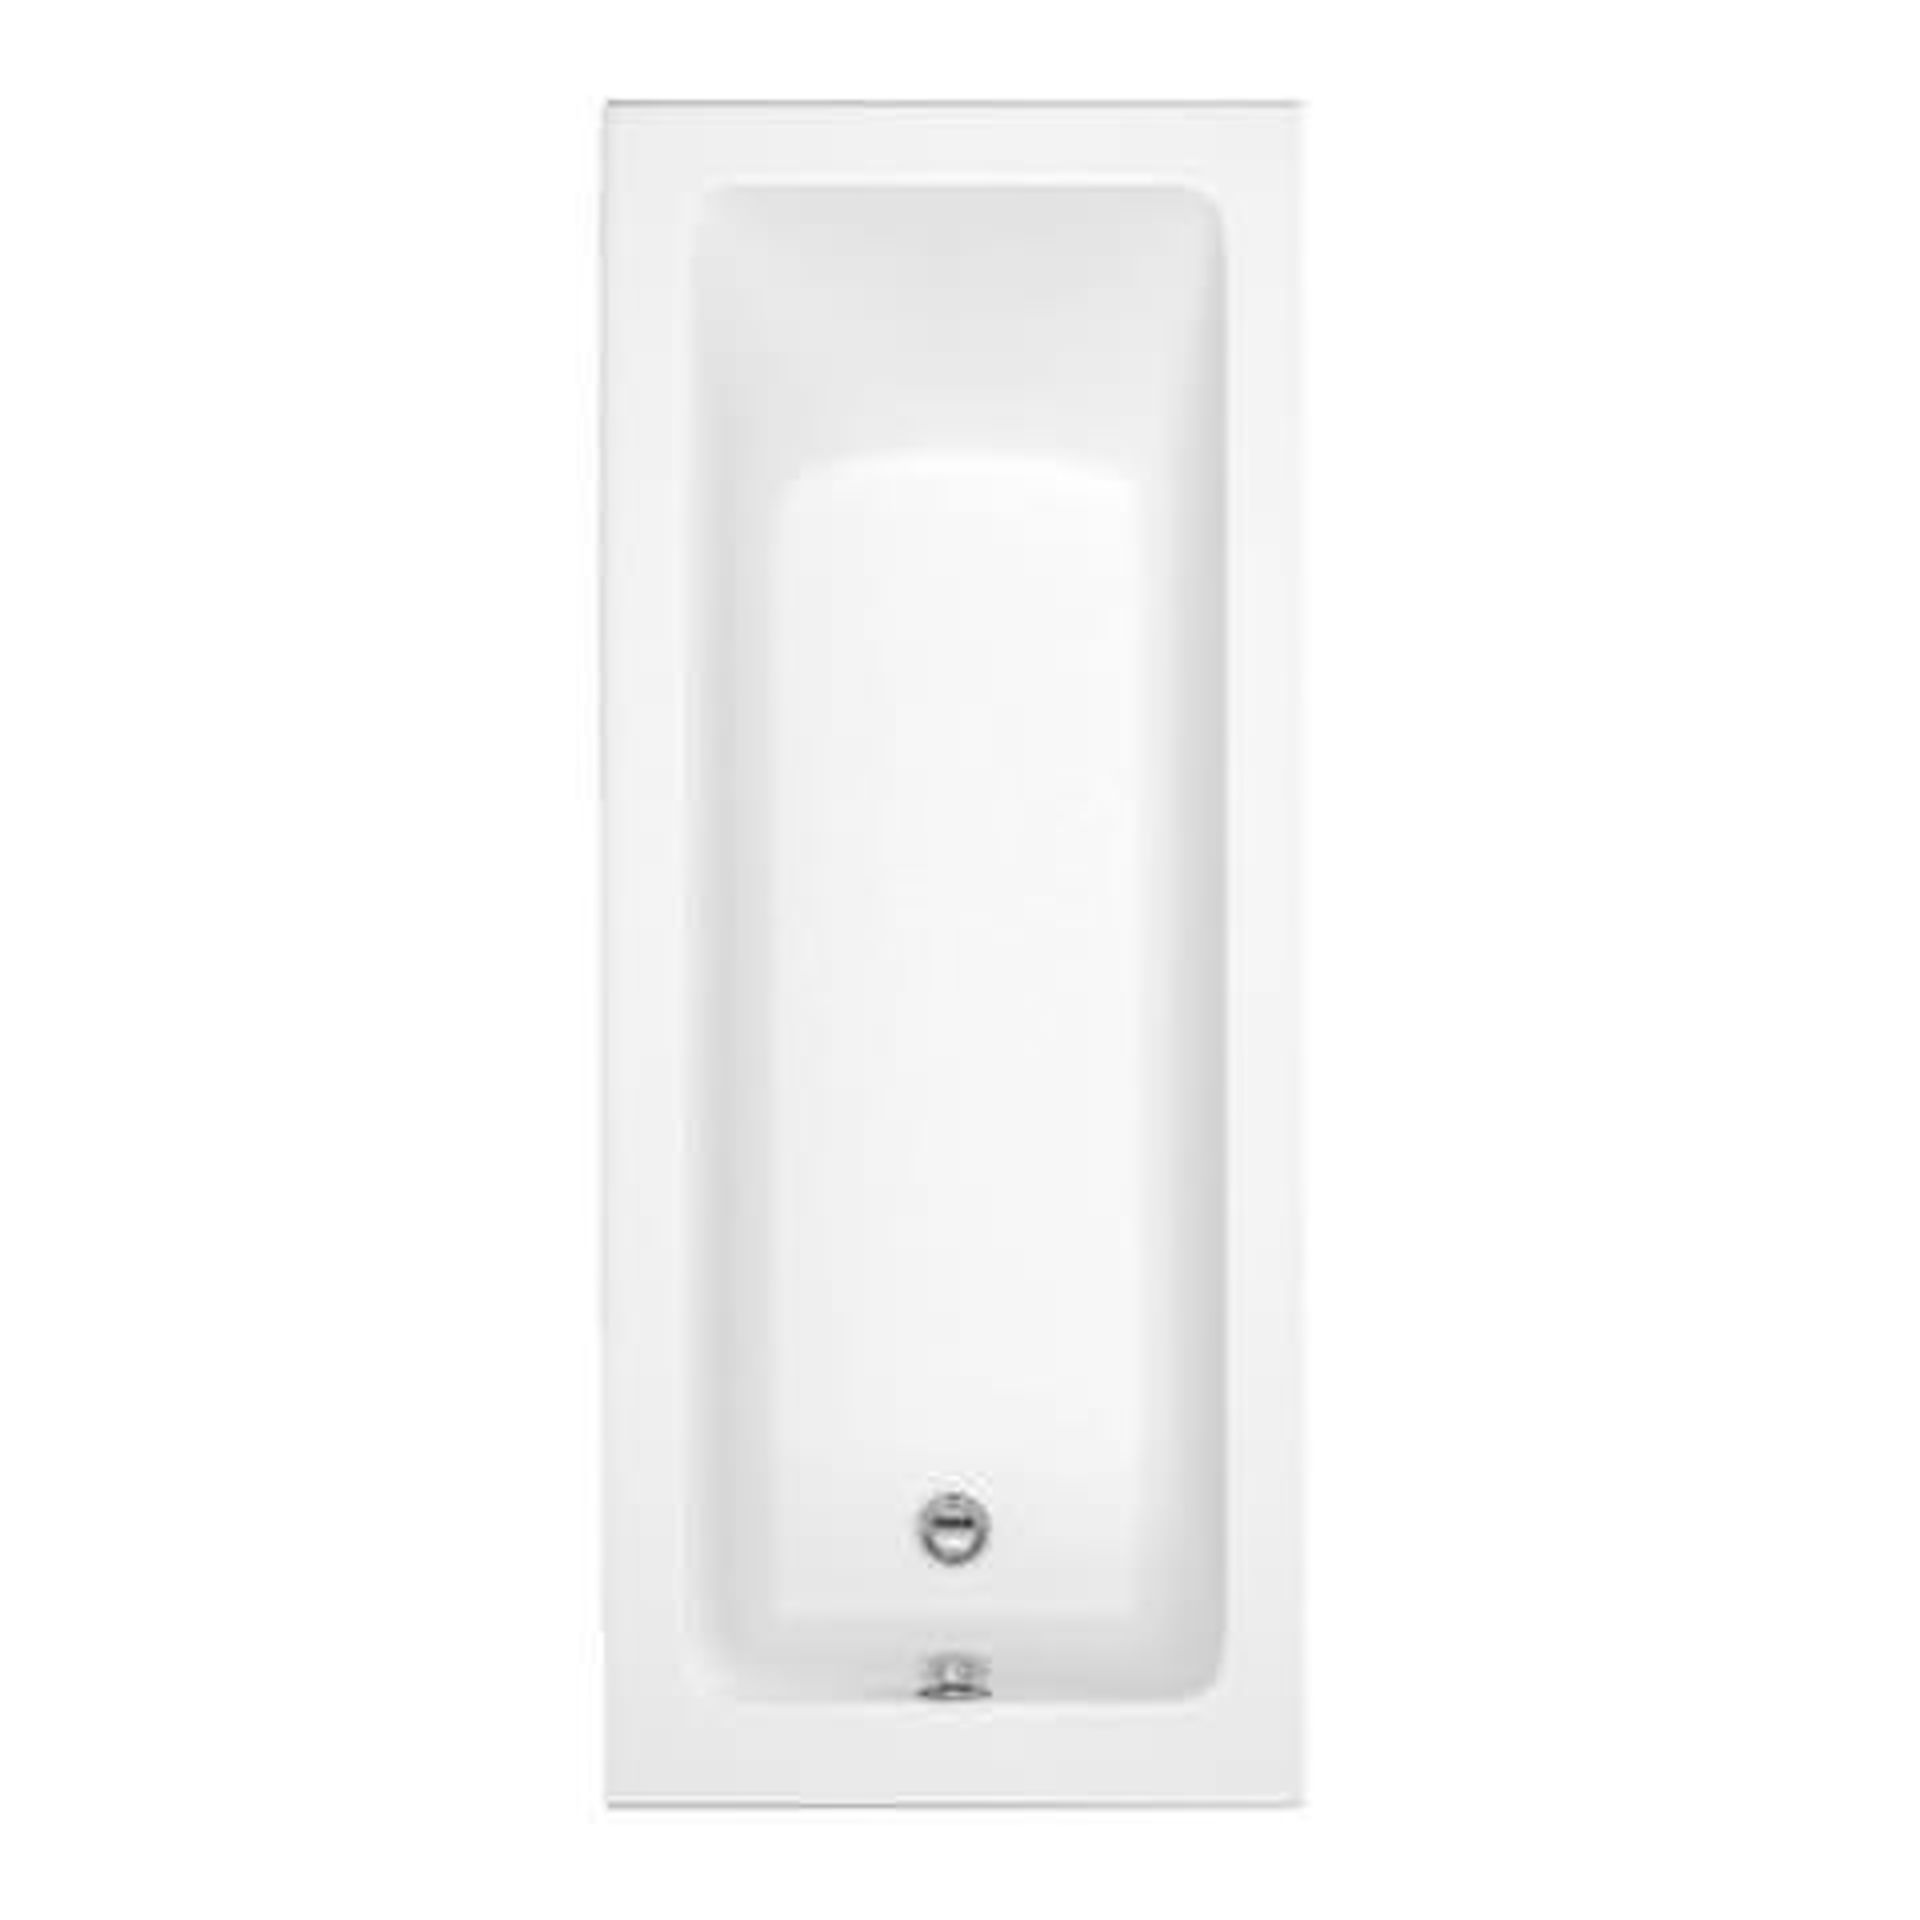 (J216) 1800x800x540mm Square Single Ended Bath. RRP £303.98. This brilliant white straight bath - Image 2 of 2